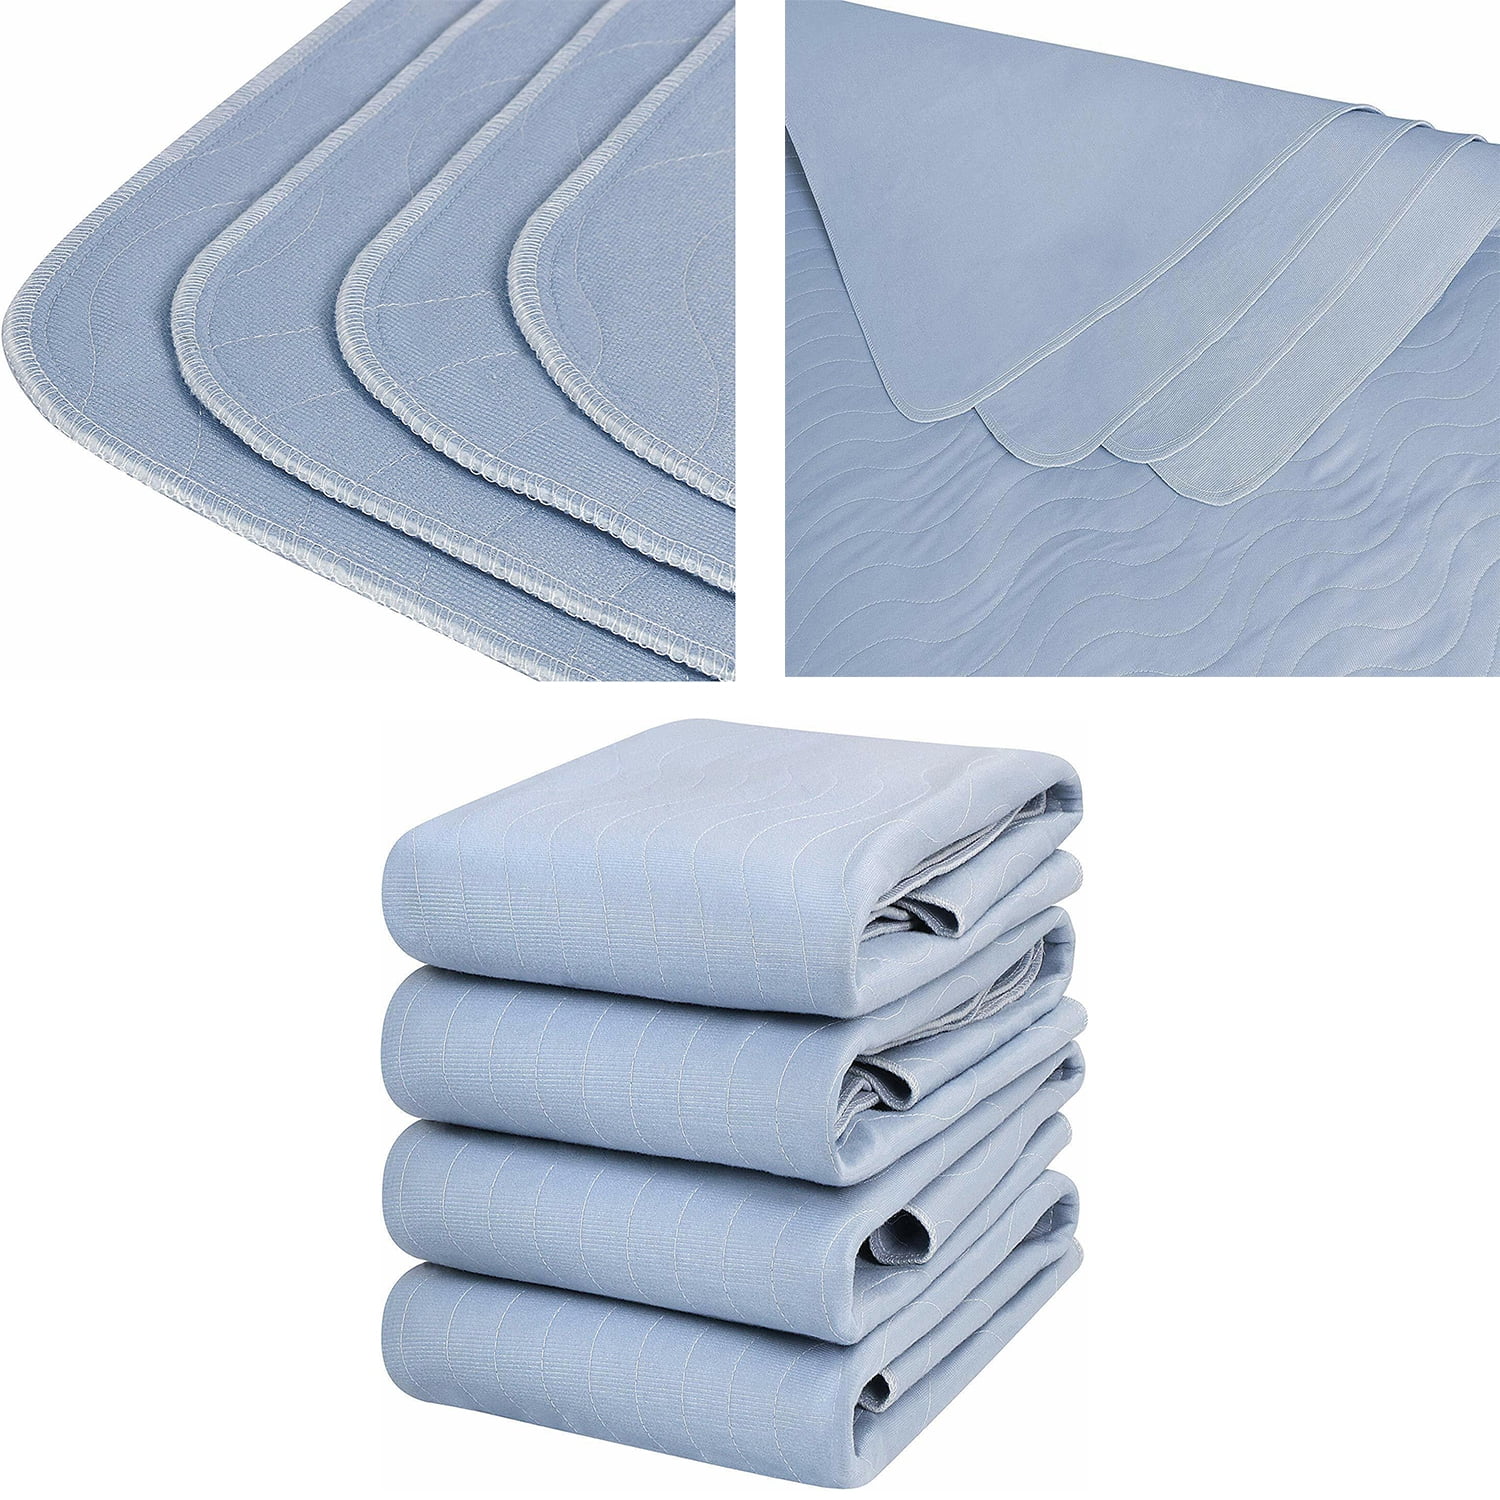 Incontinence Bed Pads - 4 Pack 24” x 36” Reusable Waterproof Mattress  Protectors - Highly Absorbent, Machine Washable - for Children, Pets and  Seniors